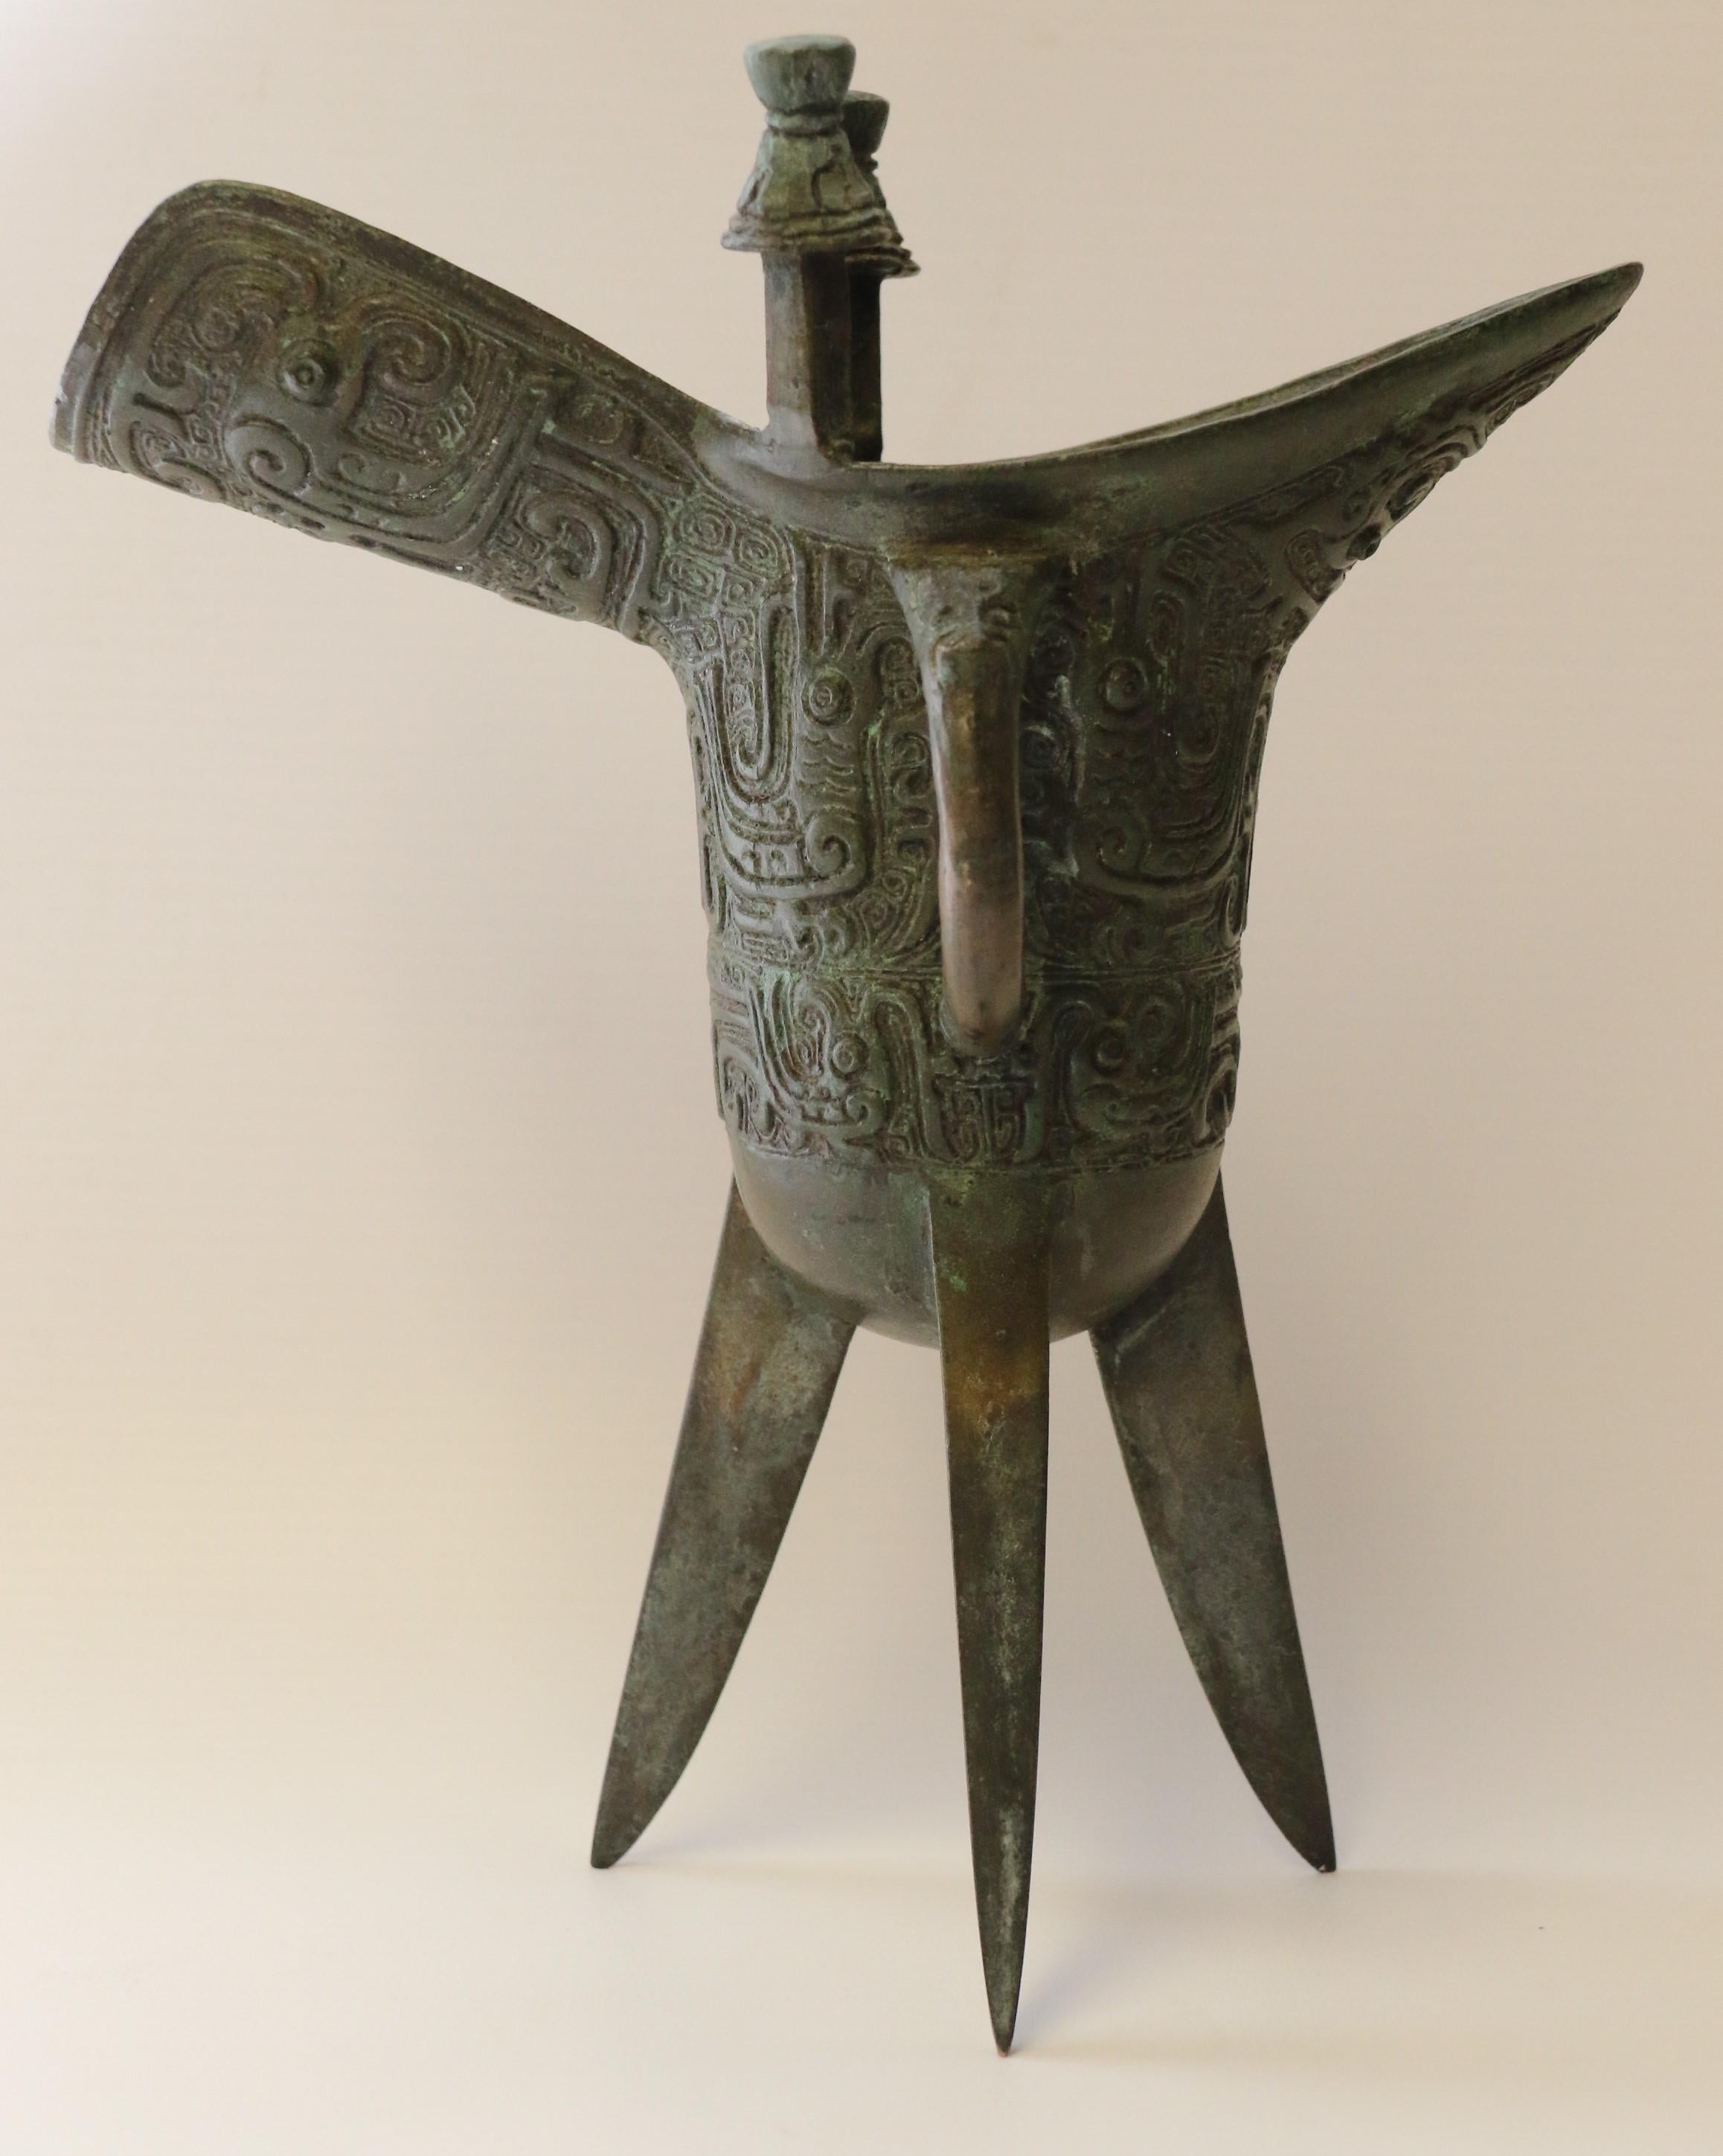 This large archaic style bronze jue is an ancient Chinese wine vessel that originally dates to 1600-1046 BC was used to heat and serve wine in ceremonial purposes. The tripod long legs would sit over hot embers to heat the wine and the two